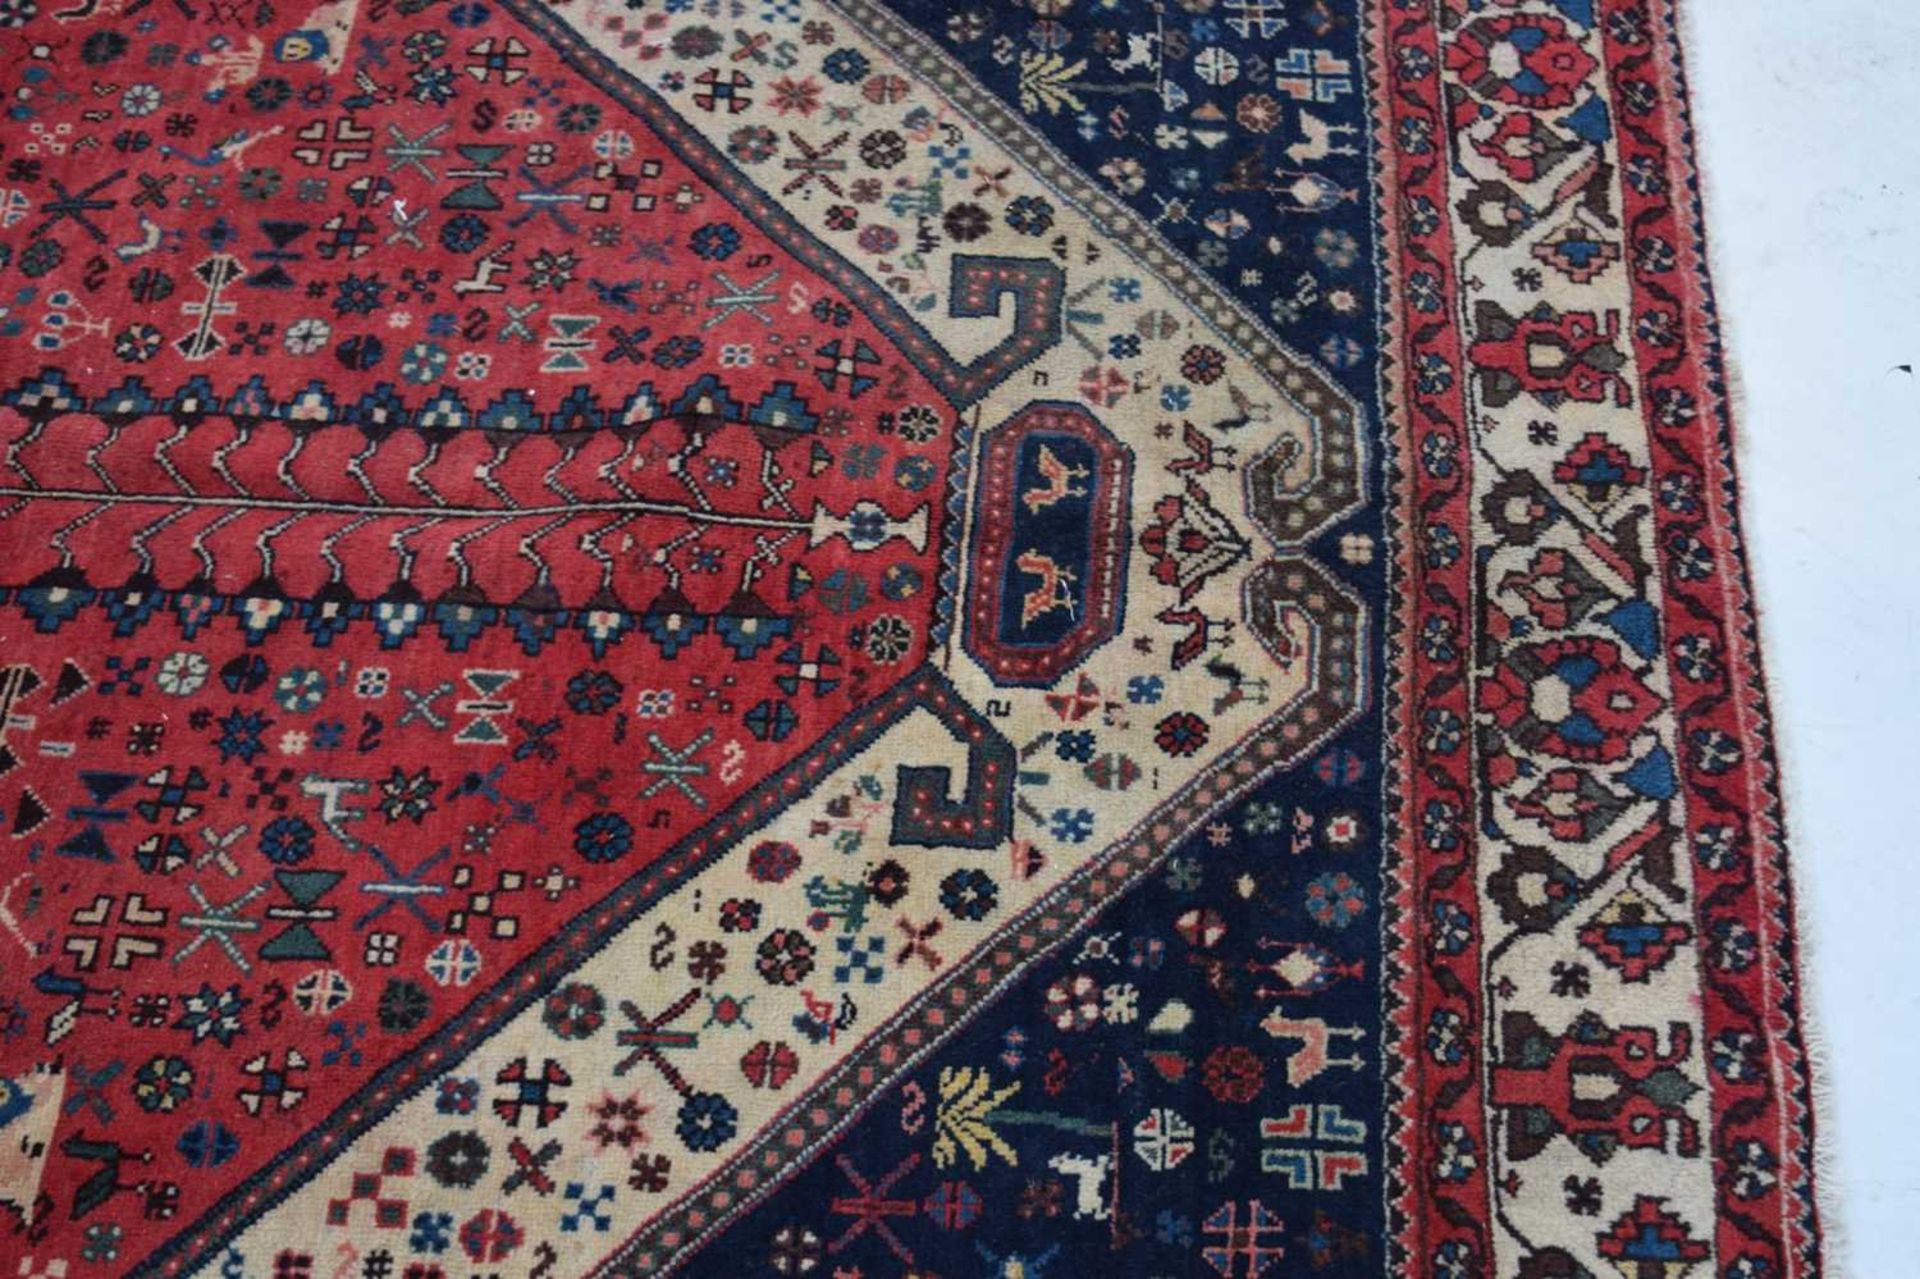 South West Persian Abadeh carpet - Image 7 of 12